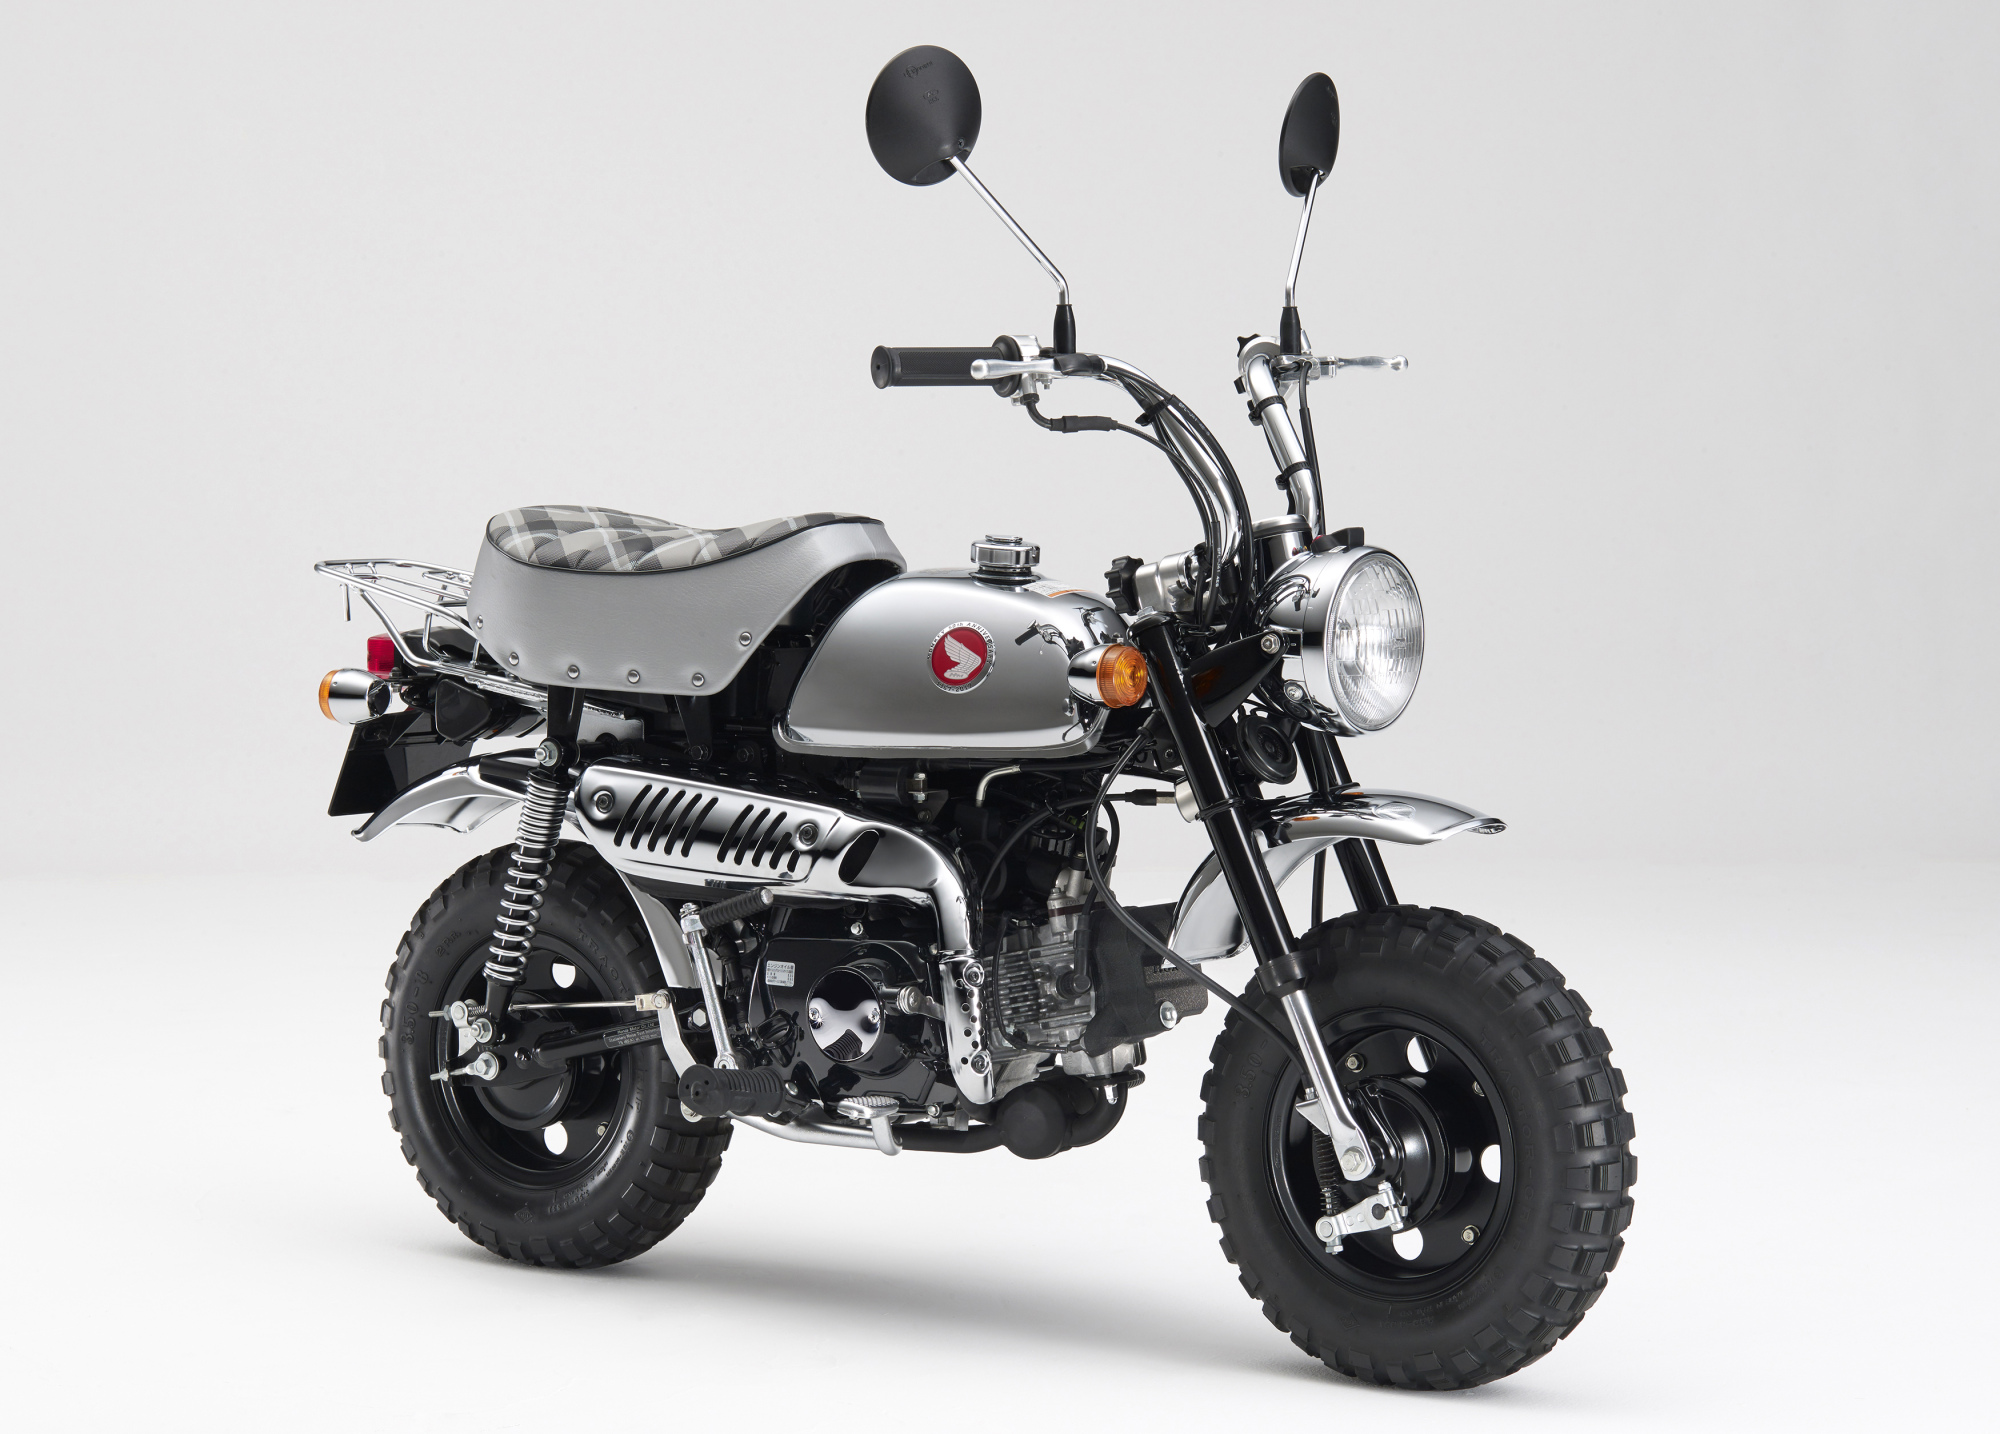 This 50cc Japanese Icon May Be About To Go Extinct Bloomberg